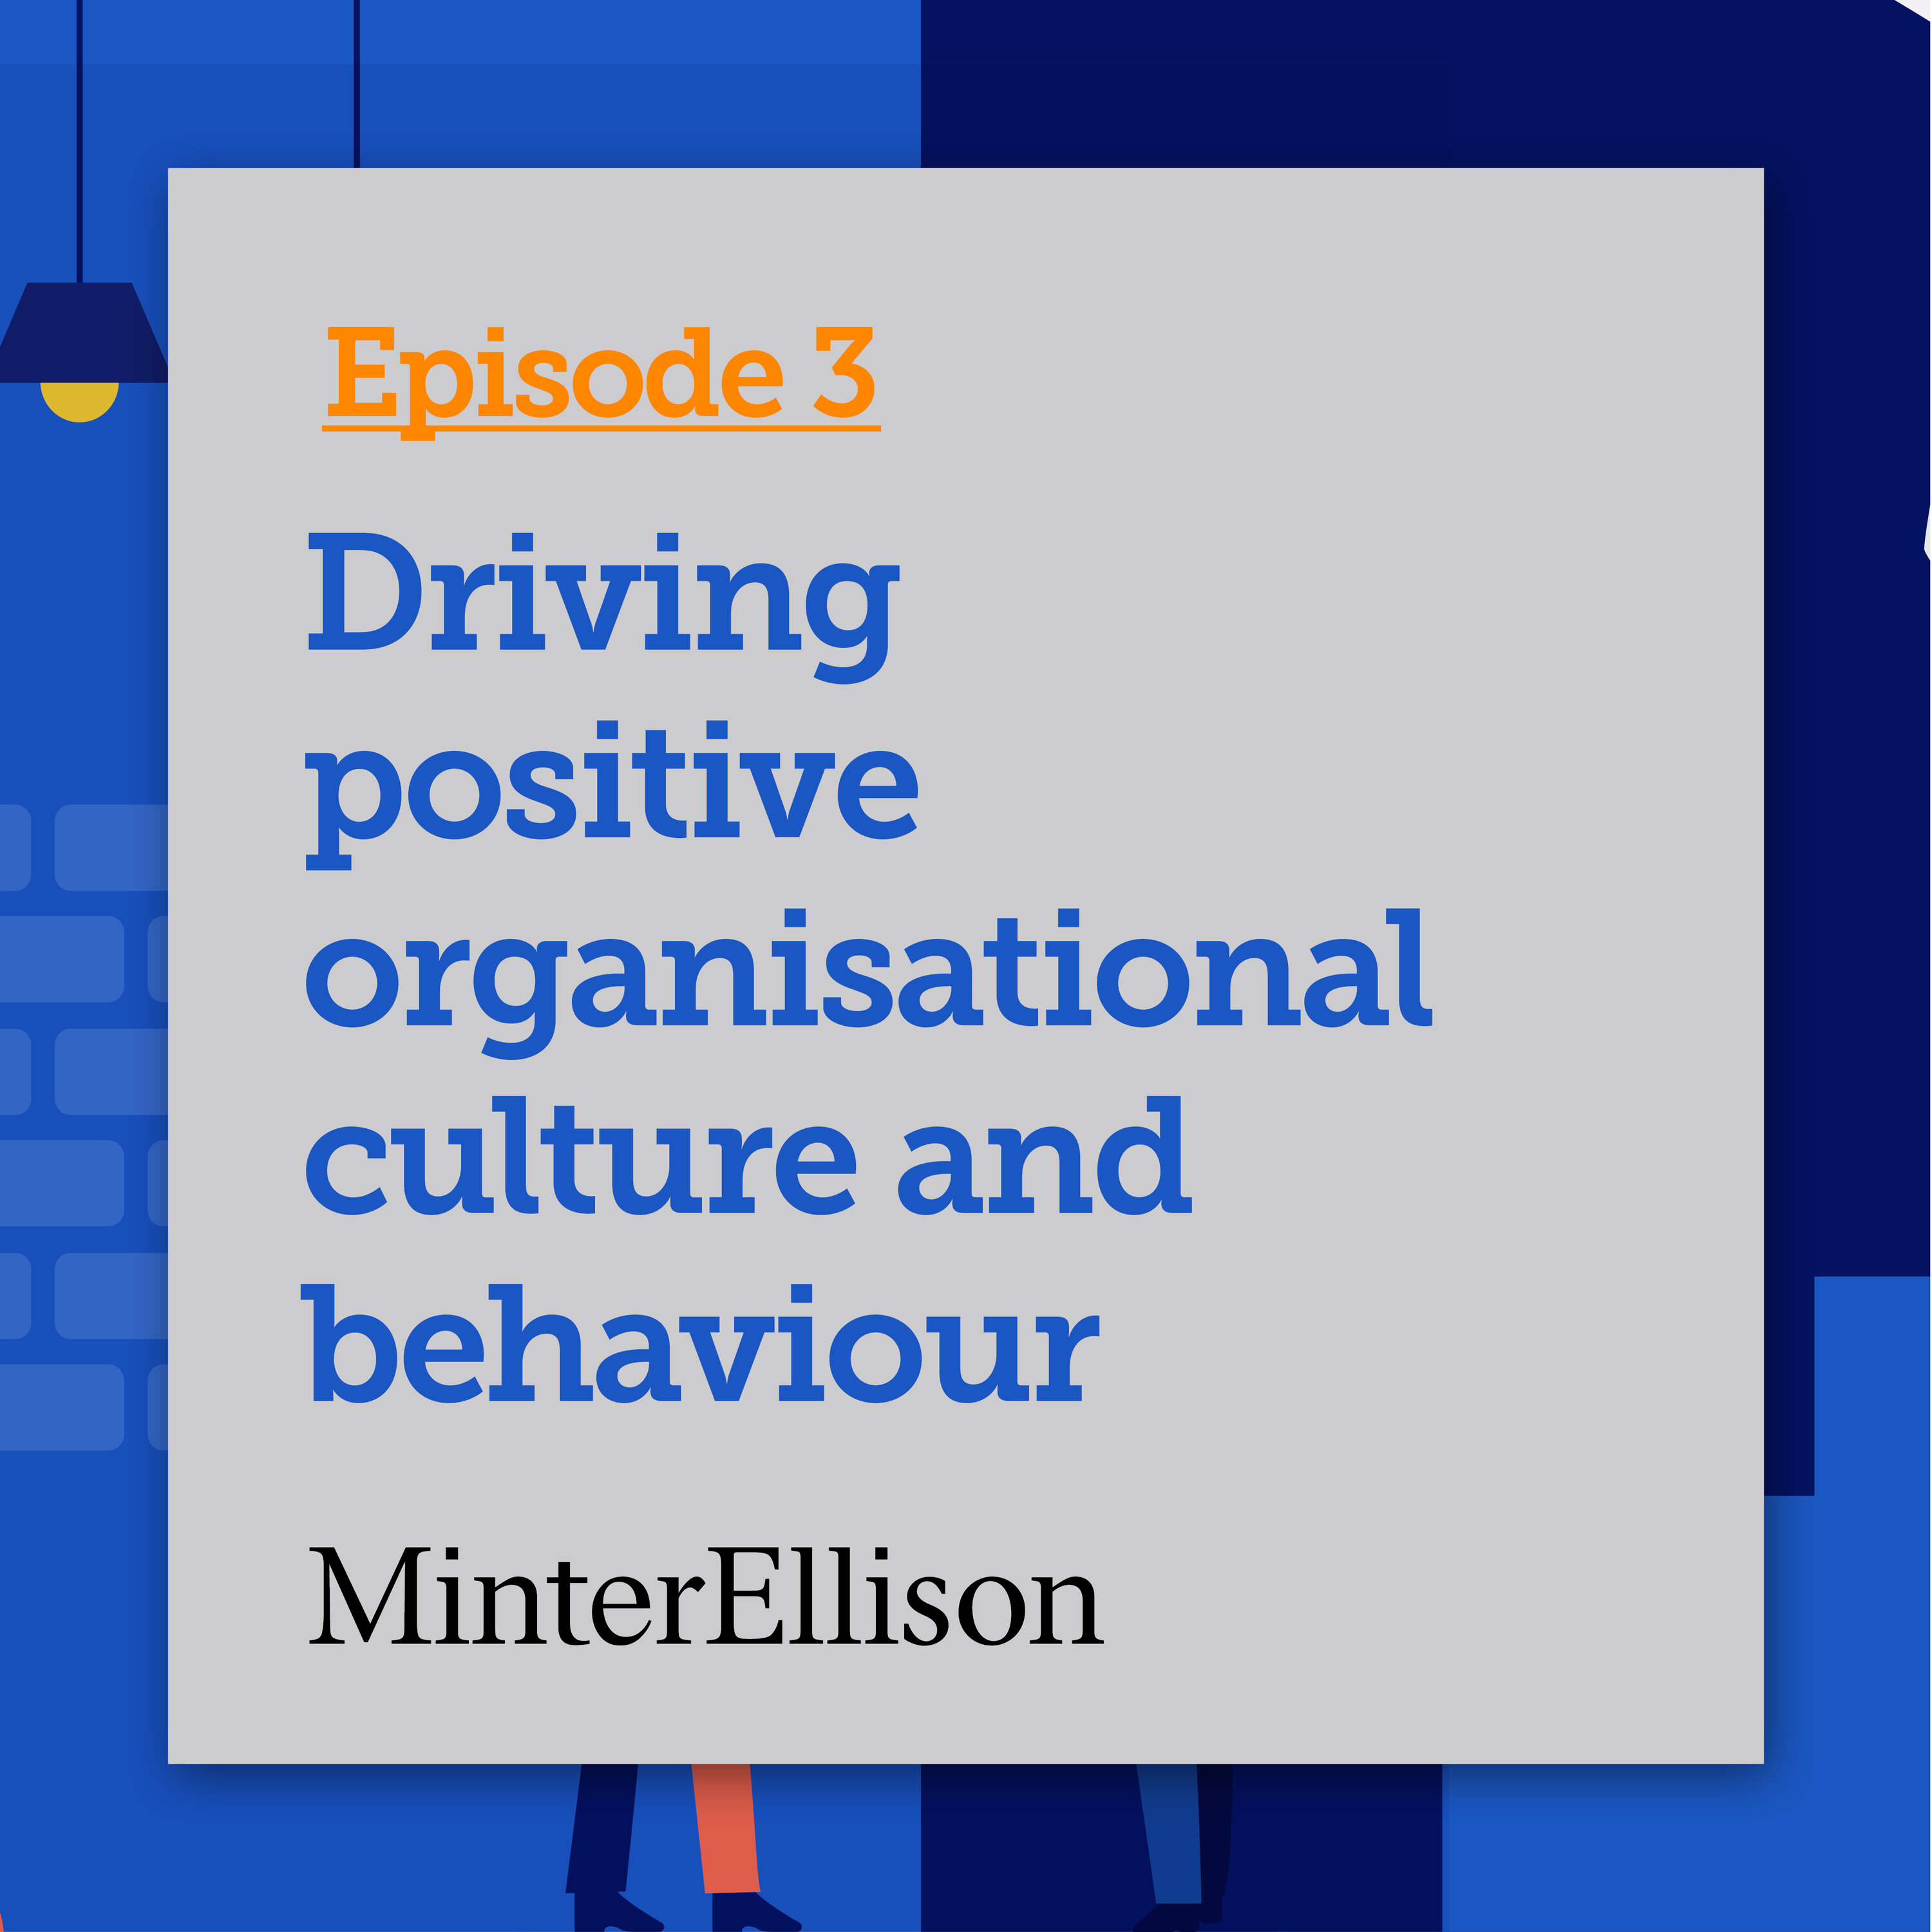 Driving positive organisational culture and behaviour